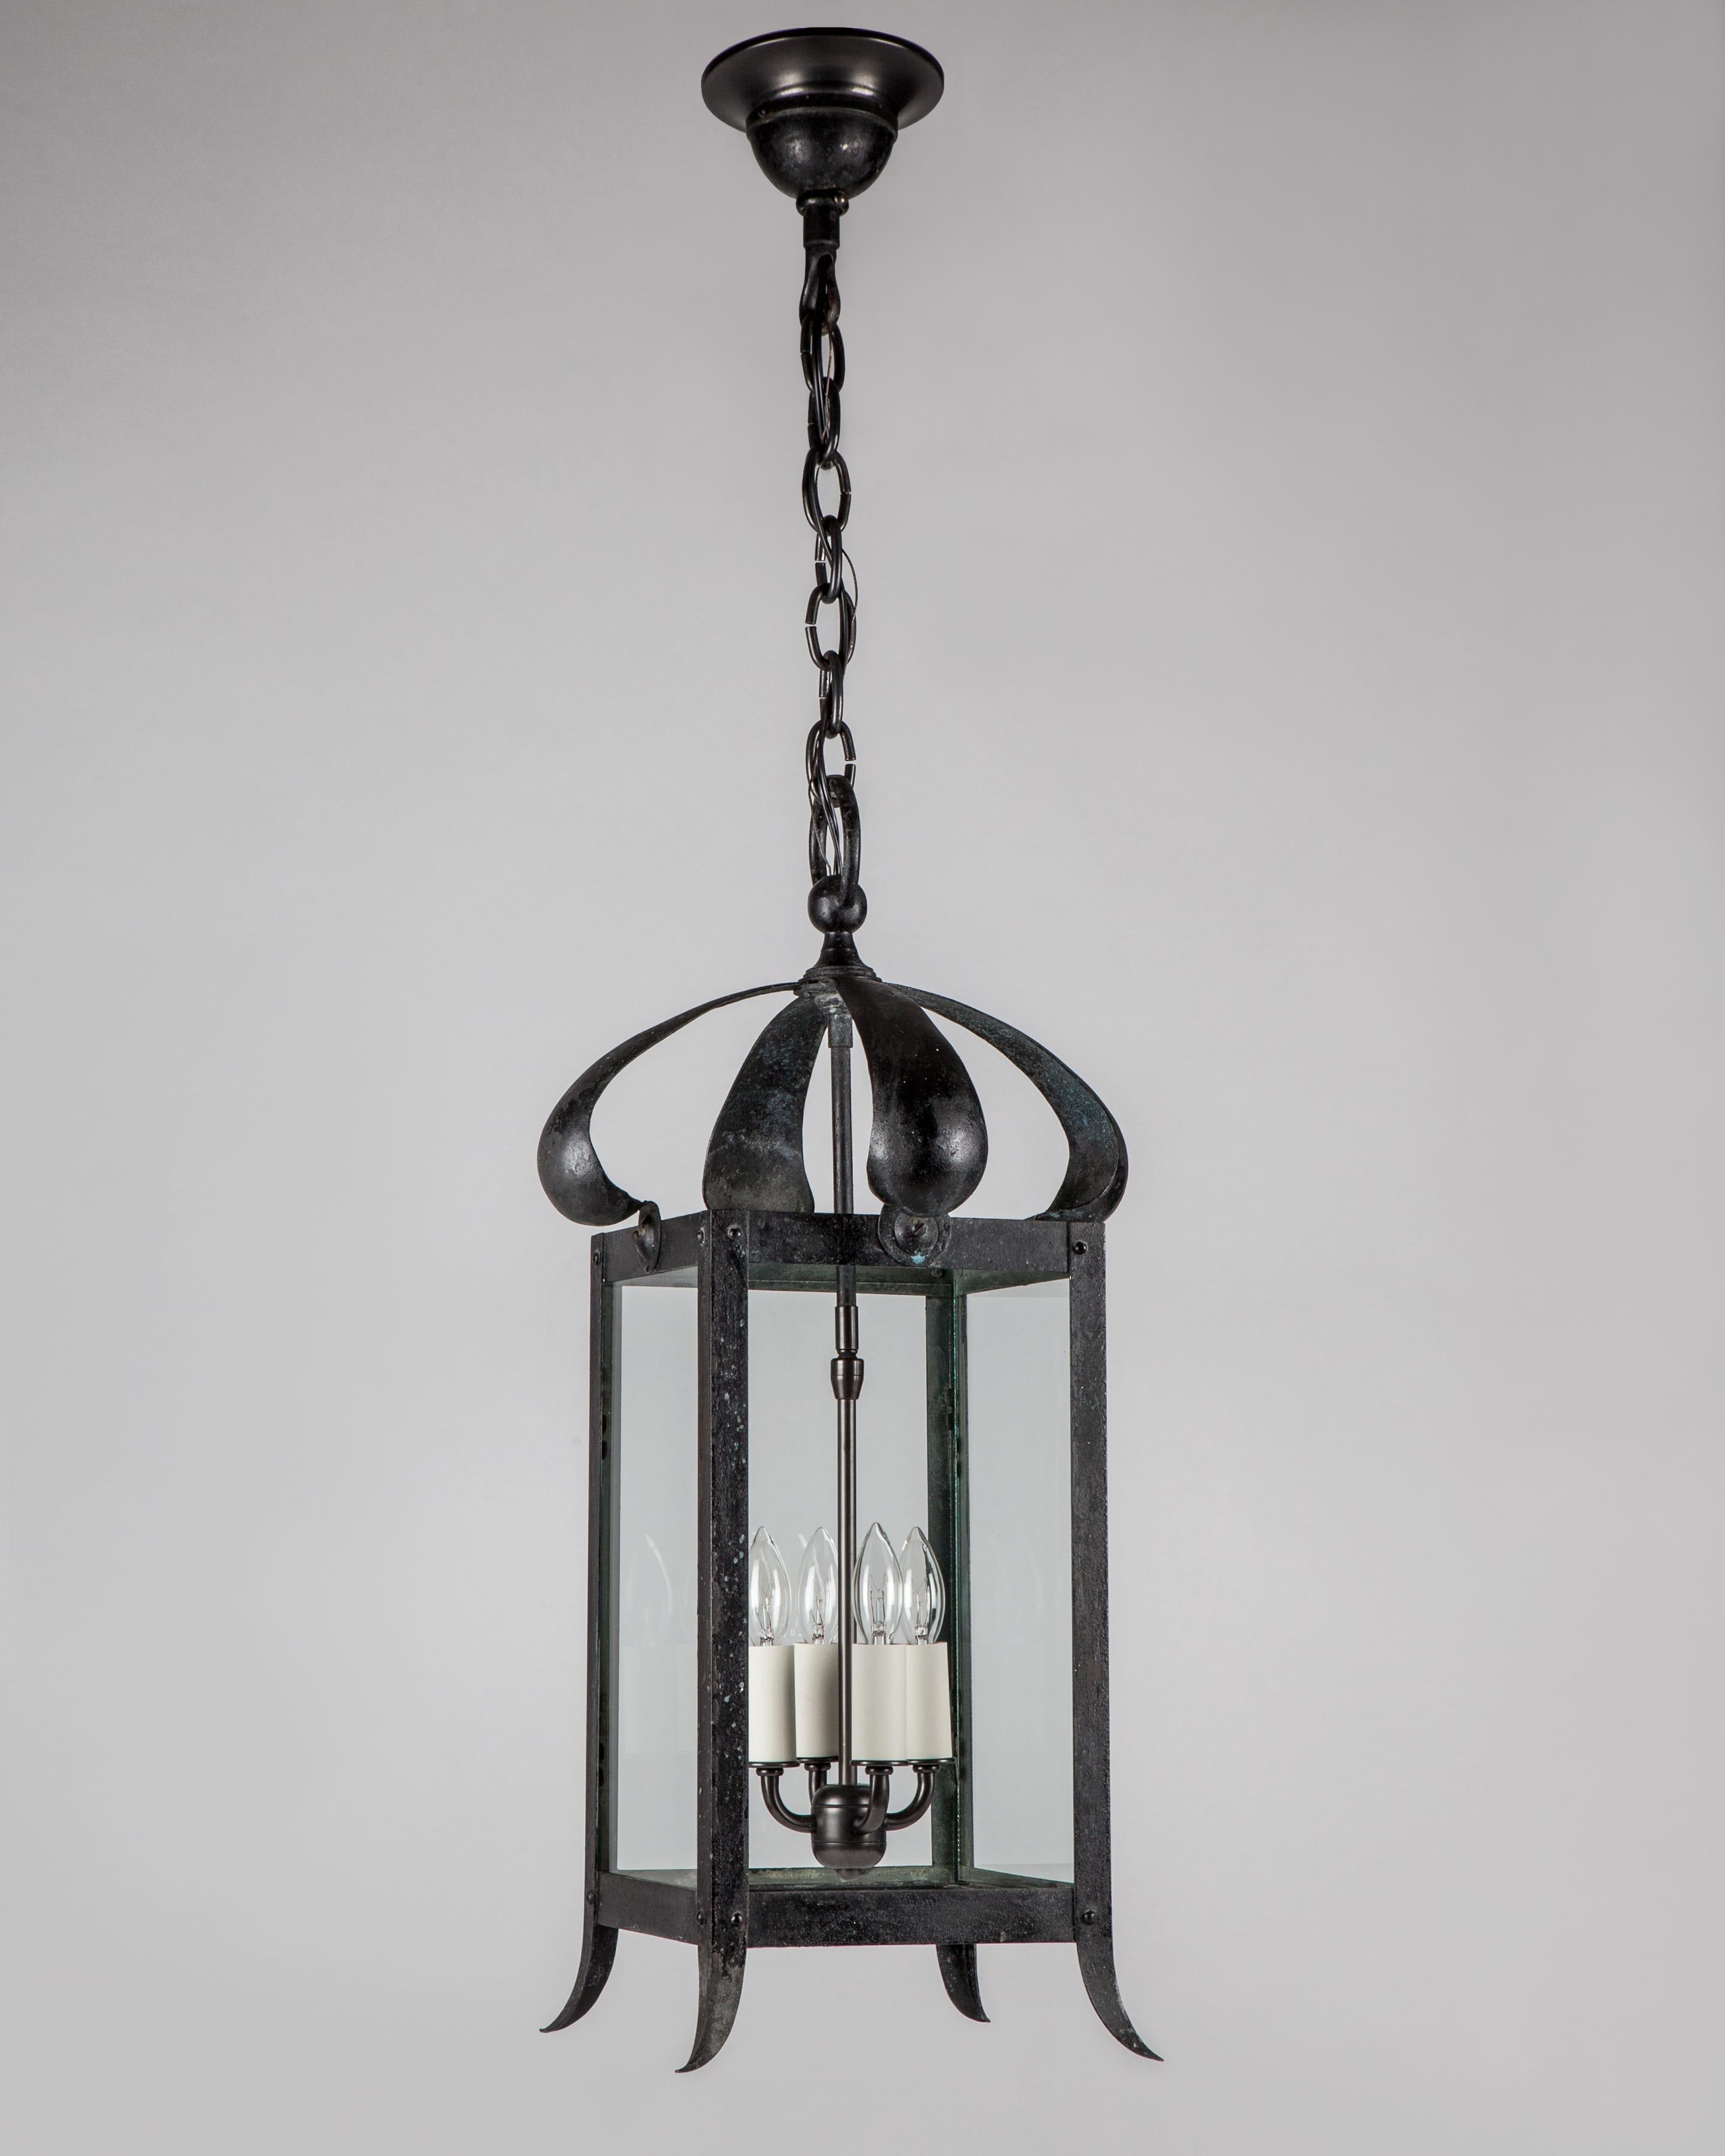 AHL4088
A four sided wrought brass lantern with scroll petal brackets, glazed with clear glass panels, in its original age-blackened patina. Due to the antique nature of this fixture, there may be some nicks or imperfections in the glass. Circa